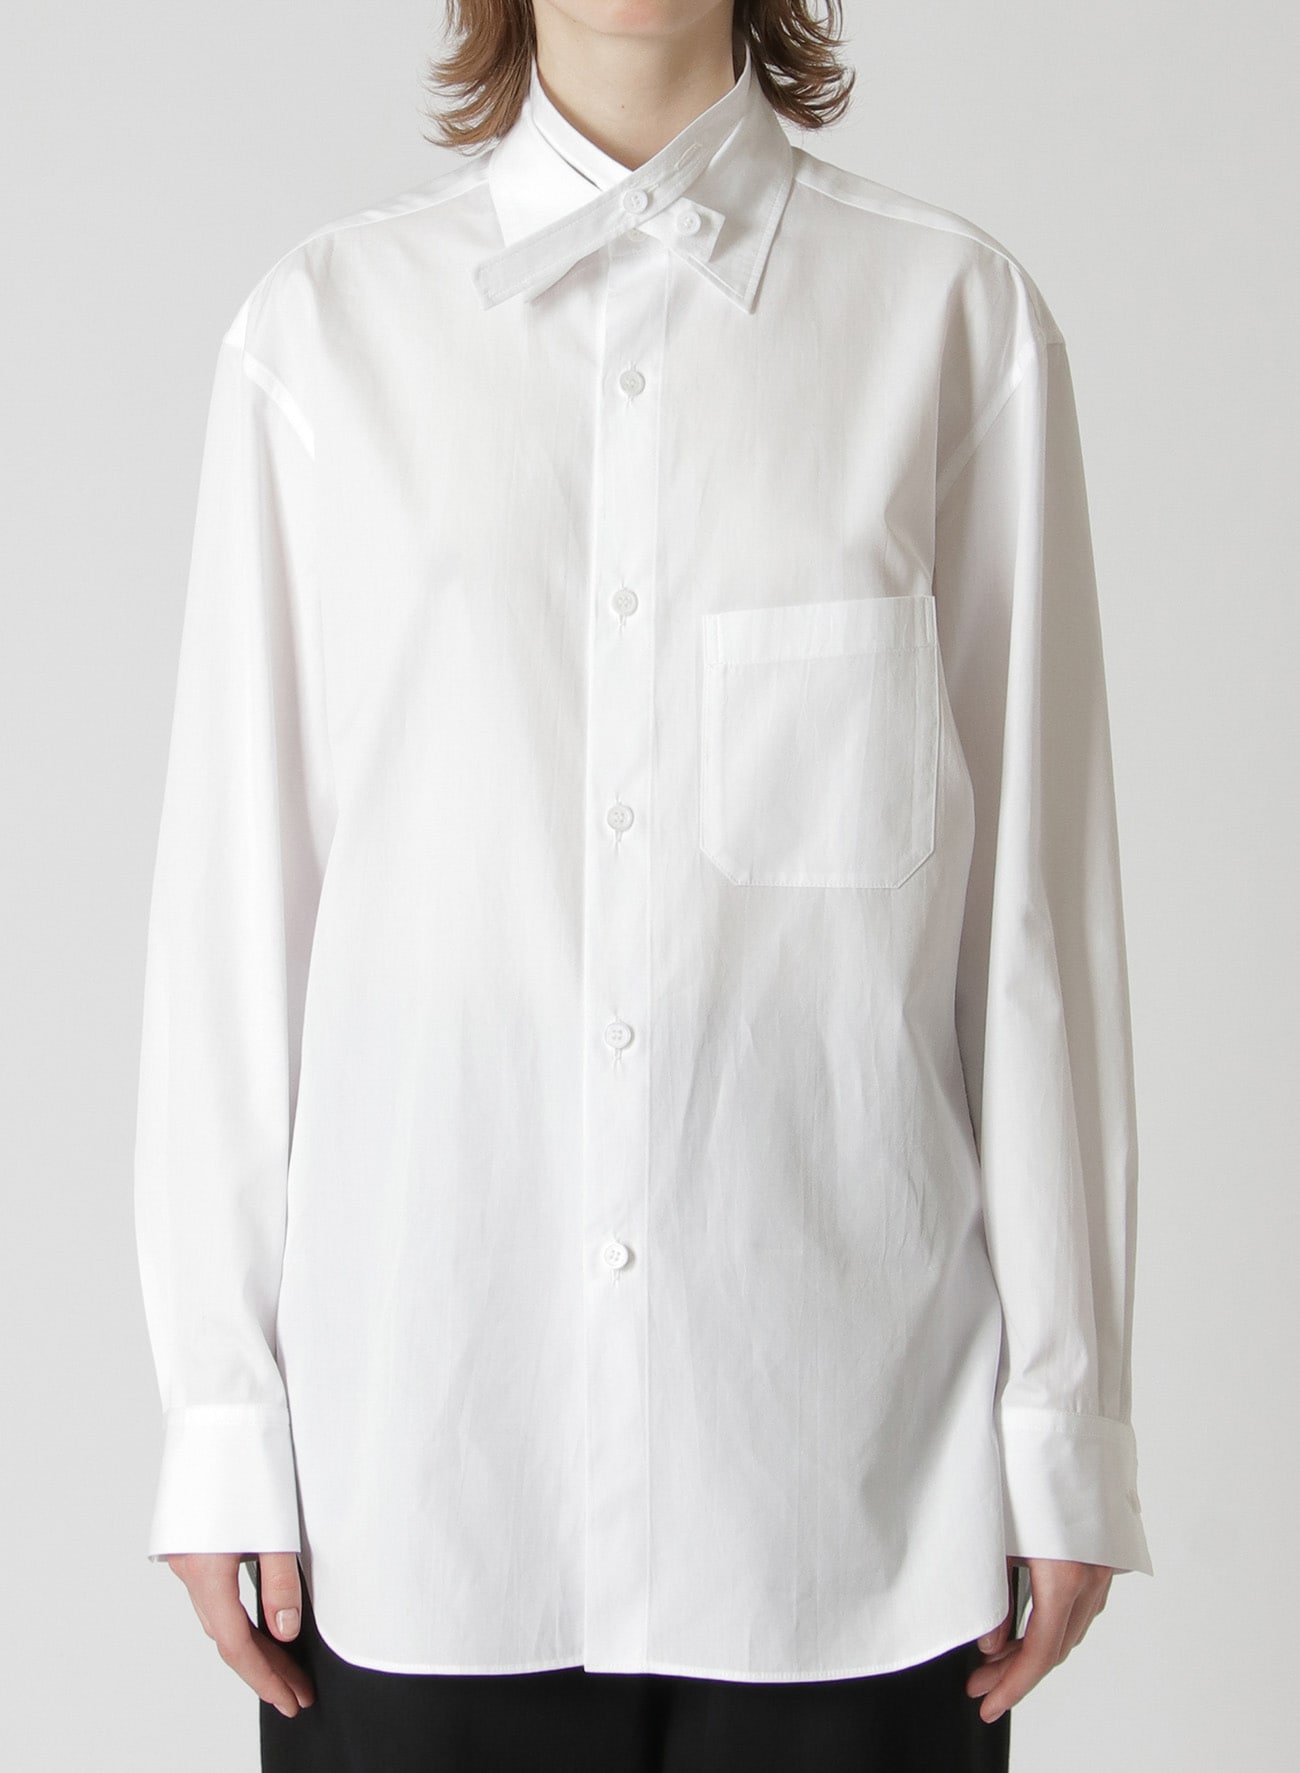 COTTON BROADCLOTH DOUBLE COLLAR SHIRT(XS White): Y's｜THE SHOP